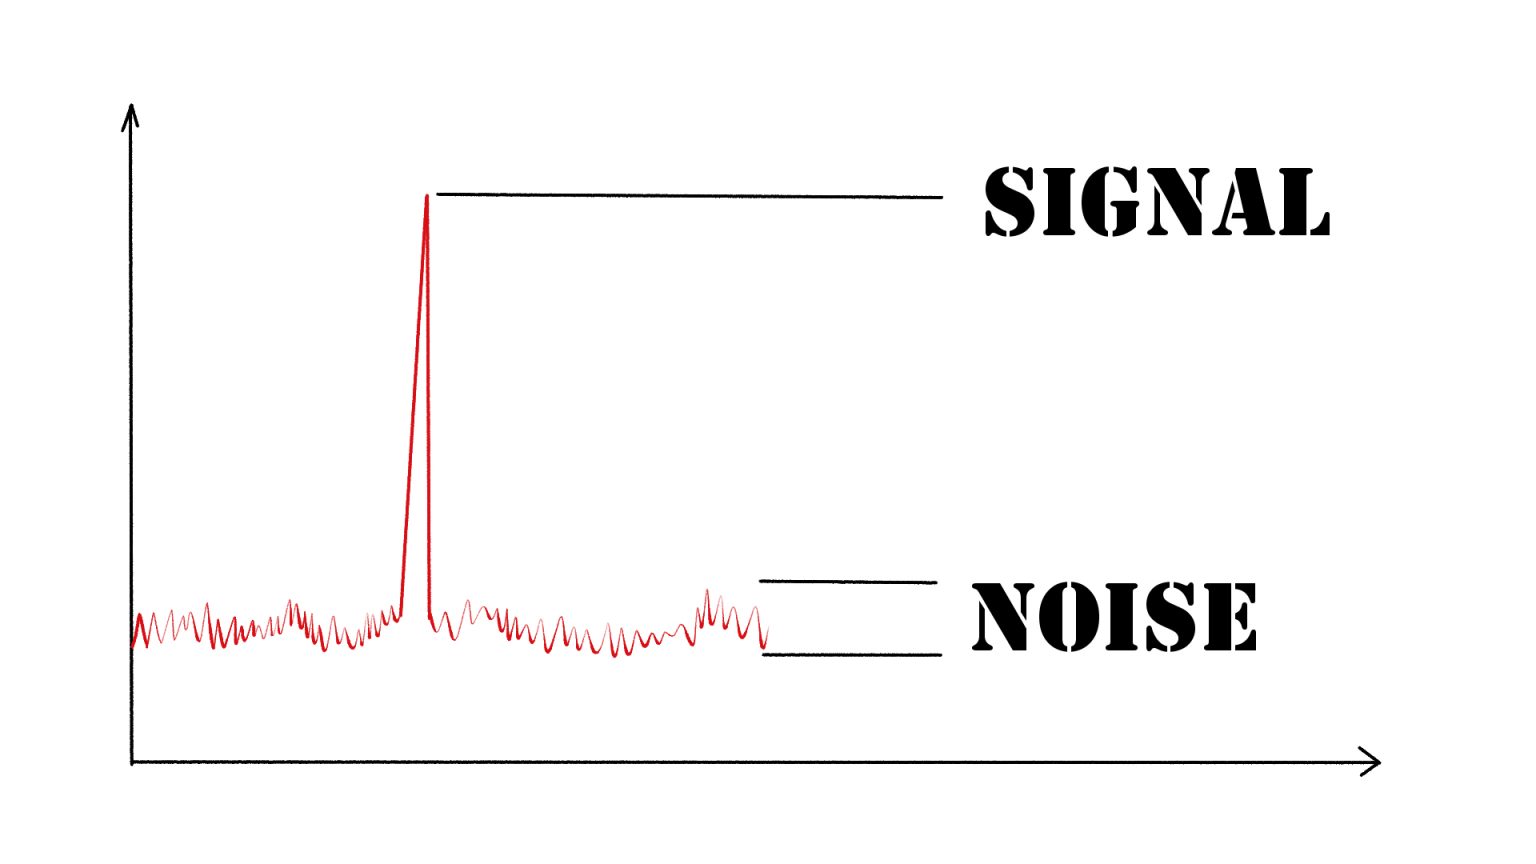 Fictitious measurement result on a spectrum analyser with a good signal to noise ratio (S/N).